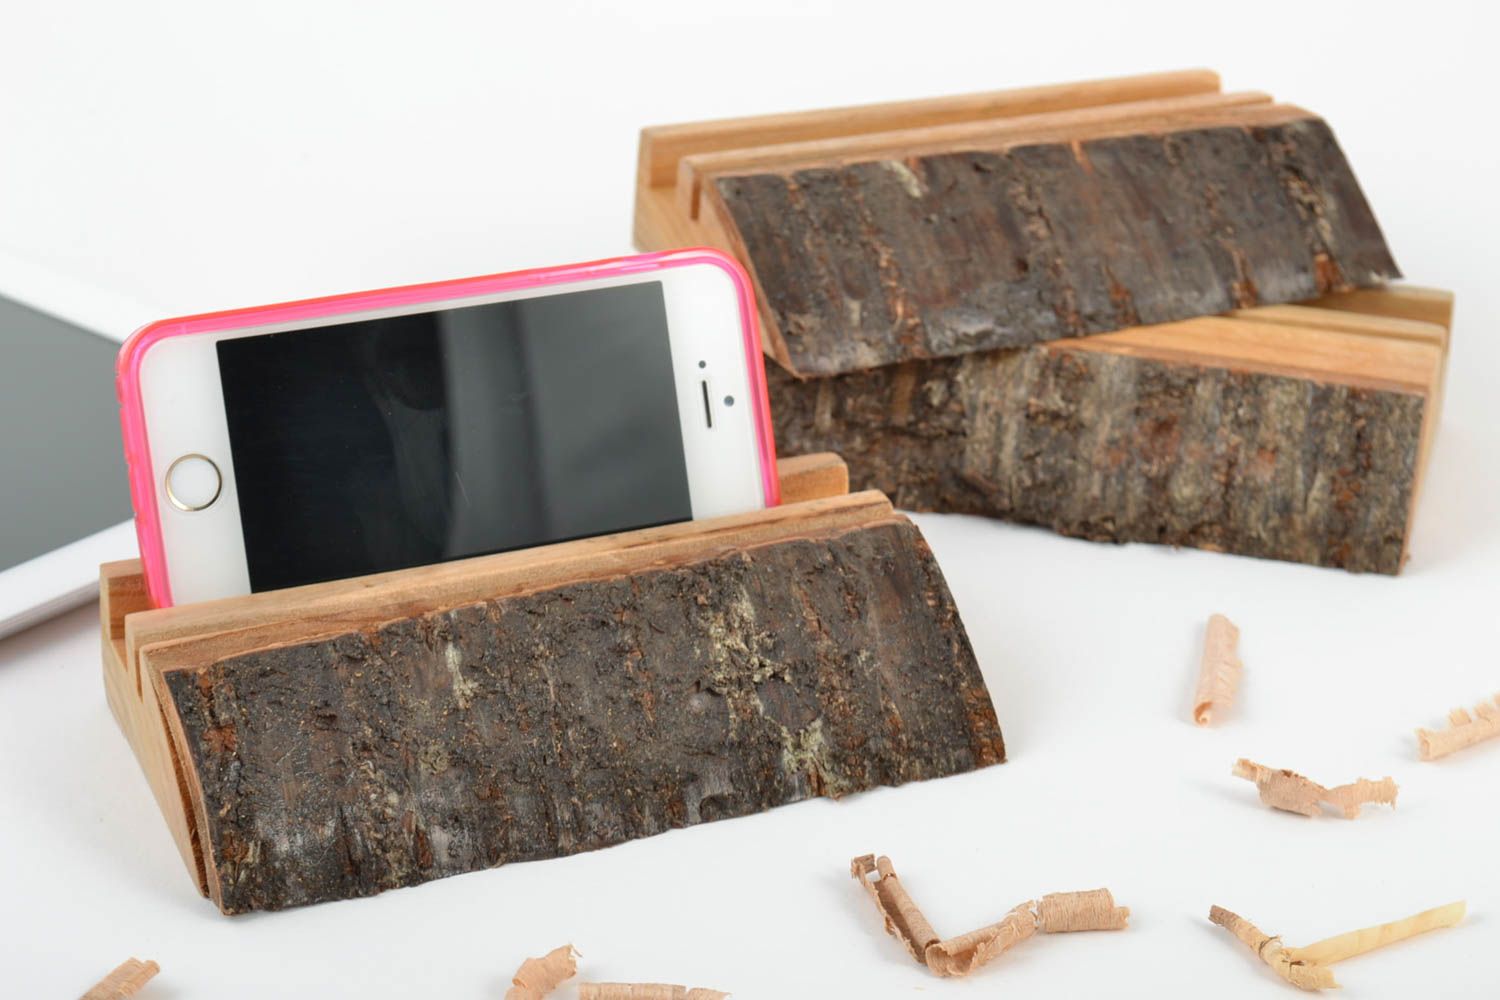 Set of 3 homemade designer wooden gadget holders for phones and tablets photo 1